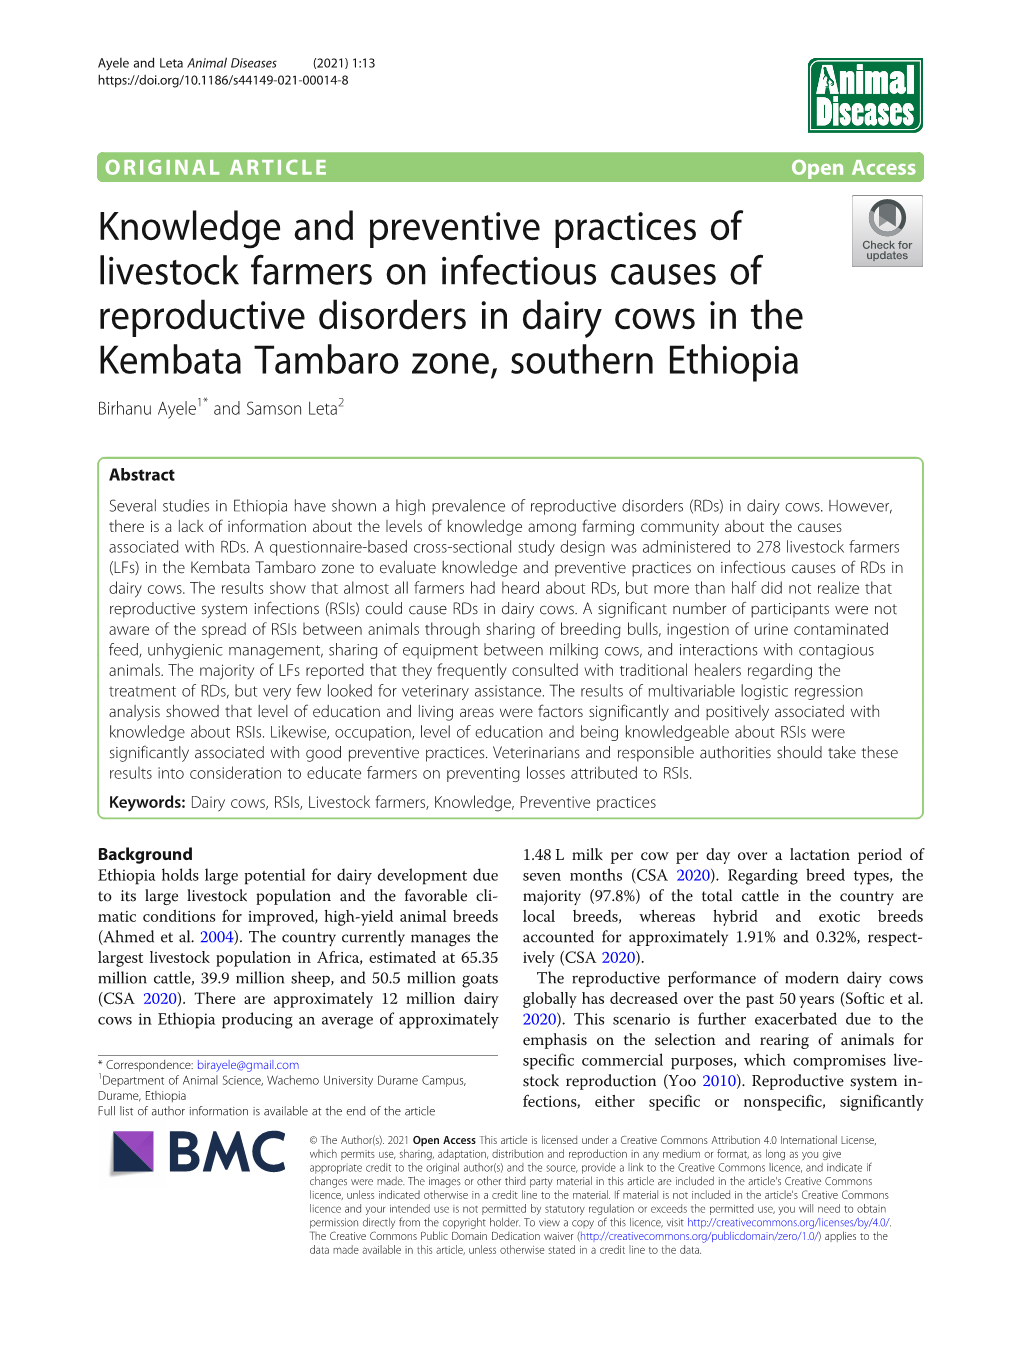 Knowledge and Preventive Practices of Livestock Farmers on Infectious Causes of Reproductive Disorders in Dairy Cows in the Kemb